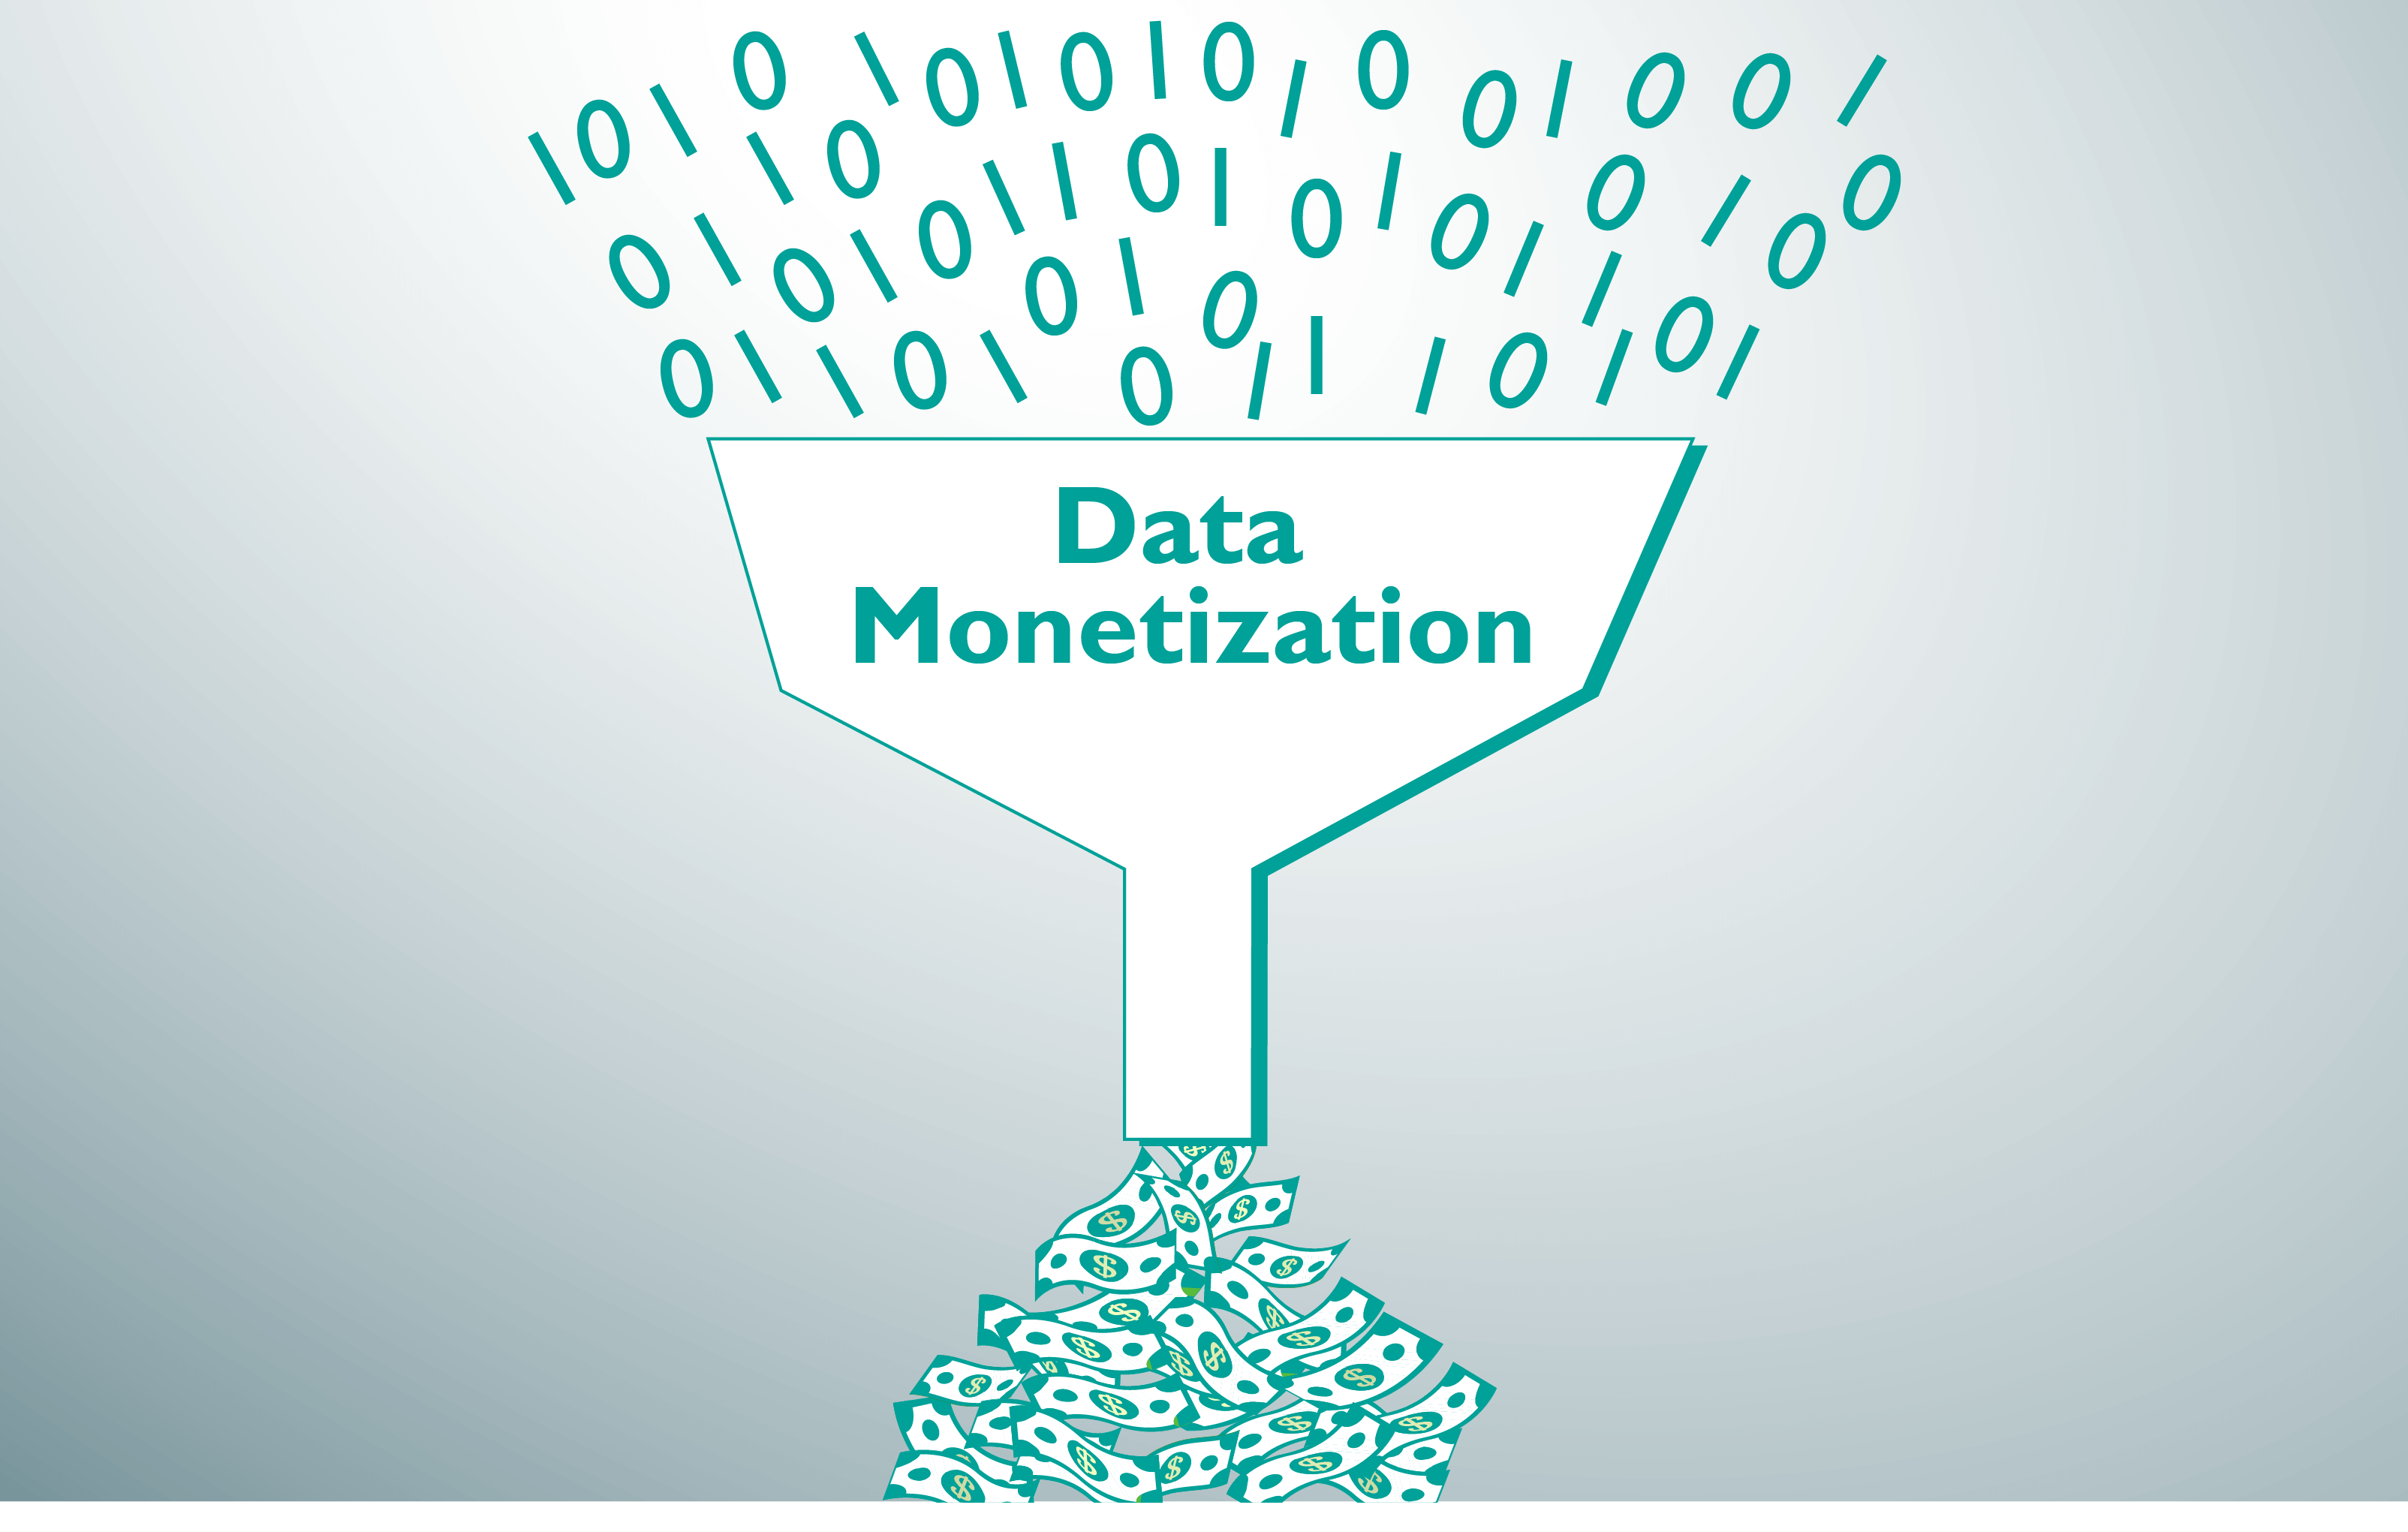 How you can make your organization ready for data monetization